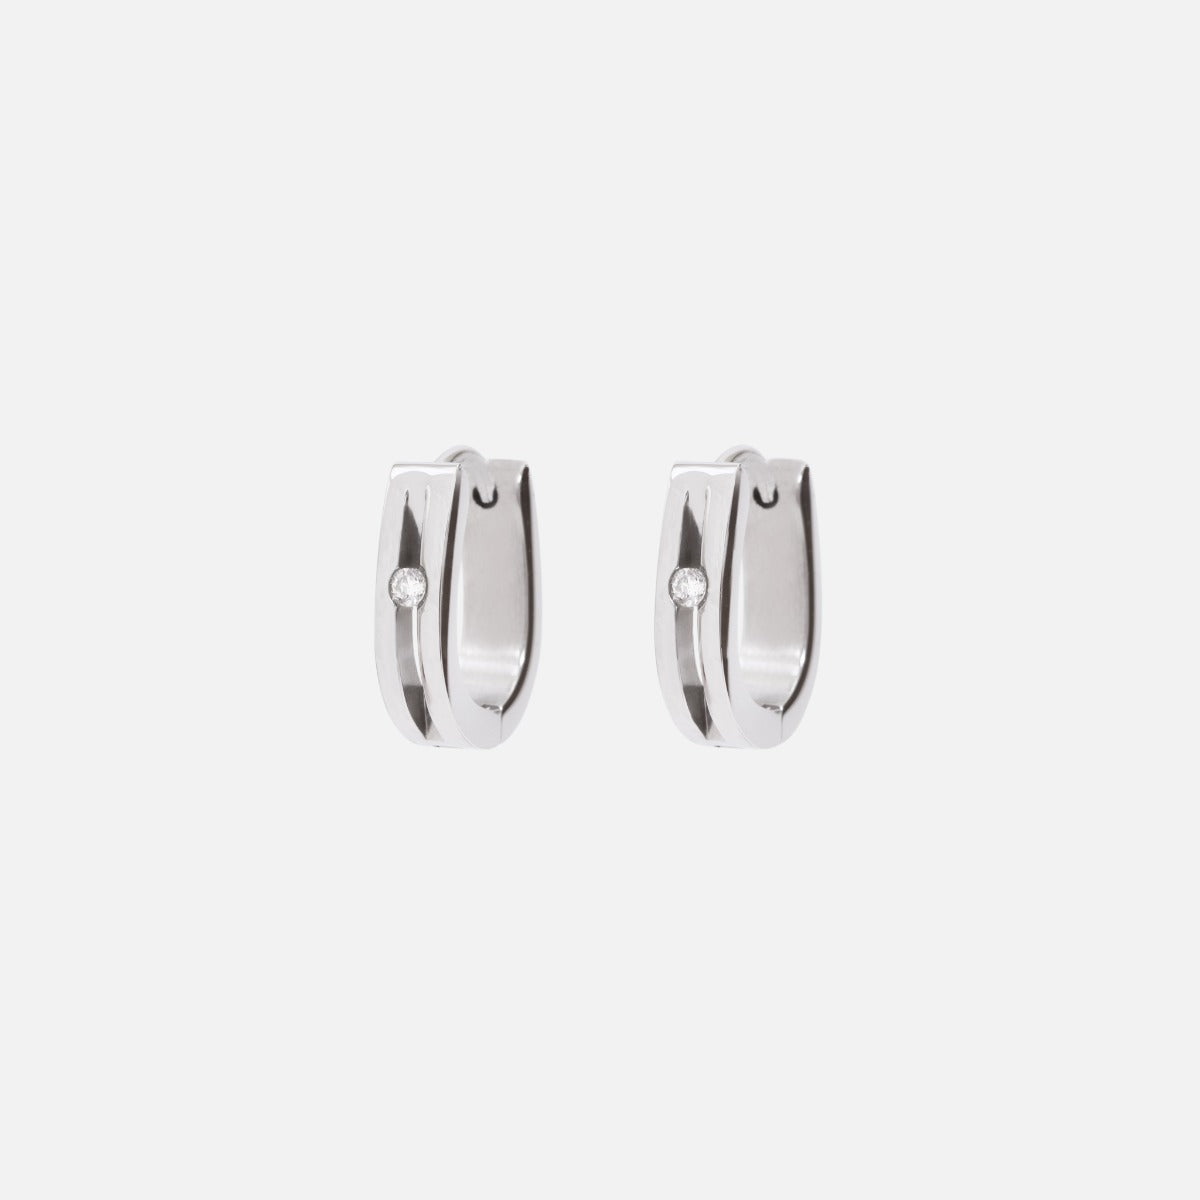 Silvered huggies earrings with cubic zirconia